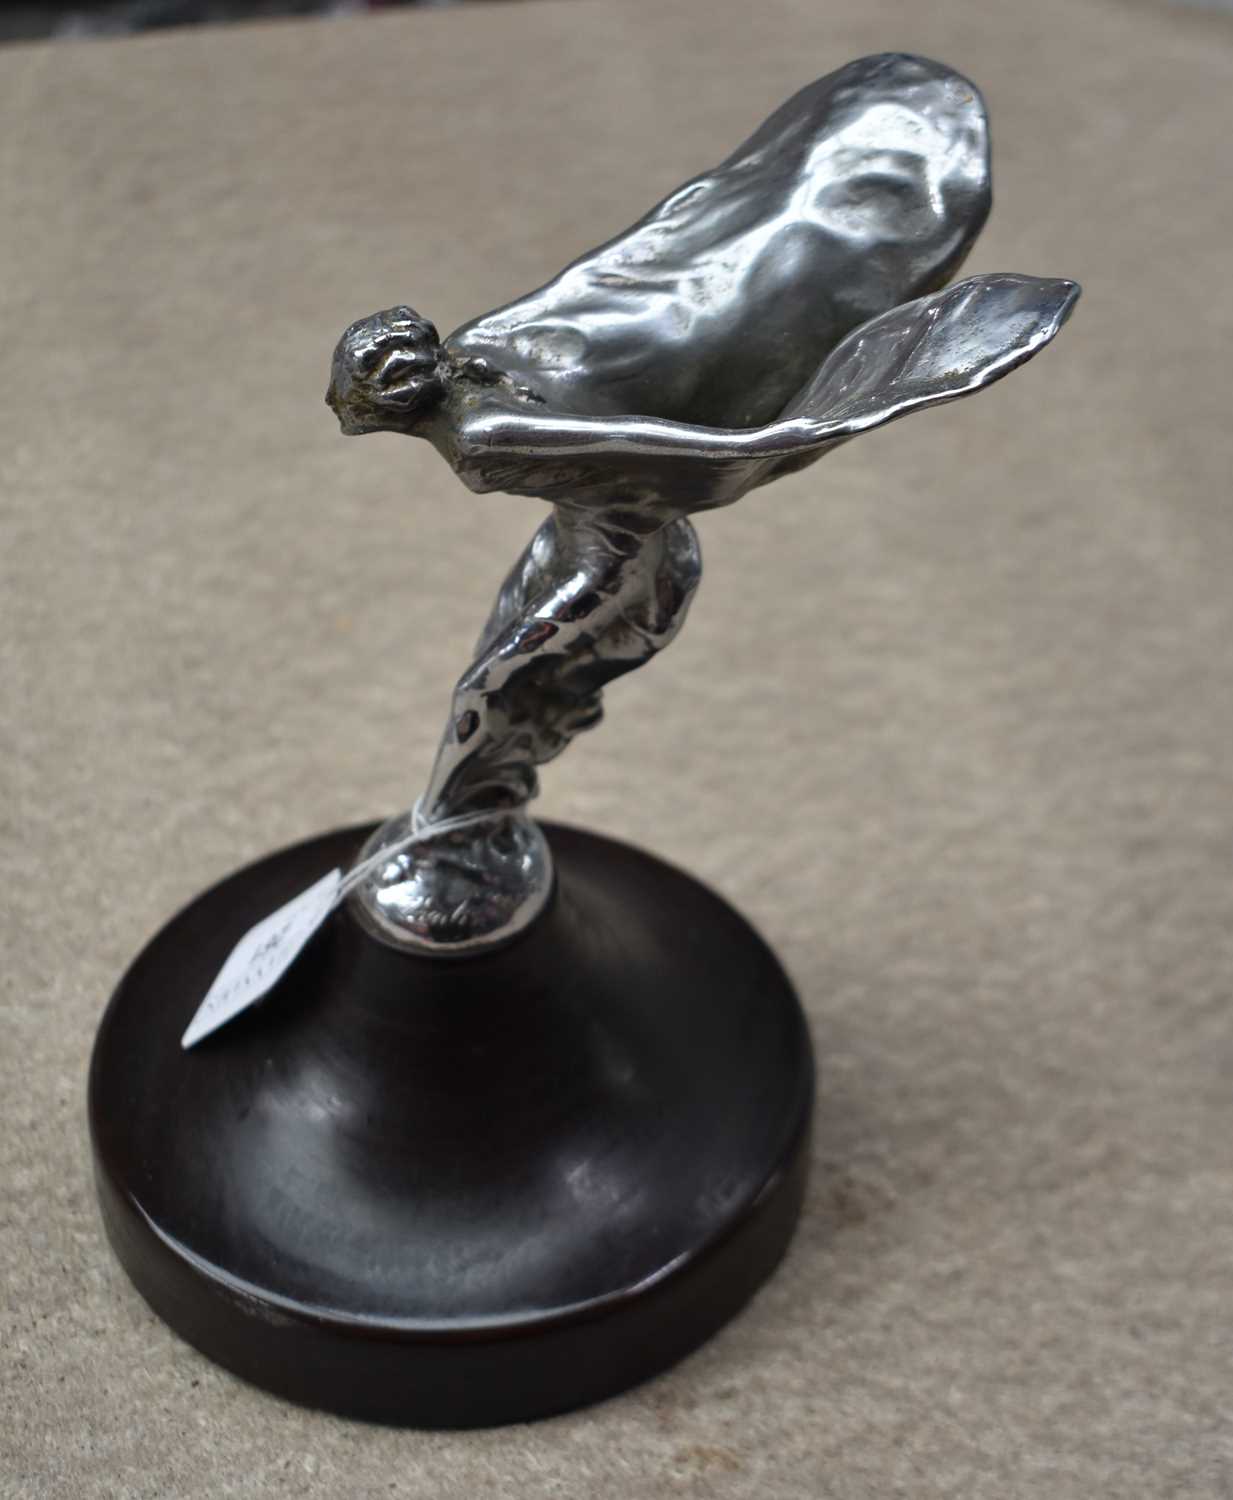 AN ANTIQUE CHARLES SYKES SPIRIT OF ECSTASY SILVER PLATED CAR MASCOT. 23 cm high. - Image 7 of 15